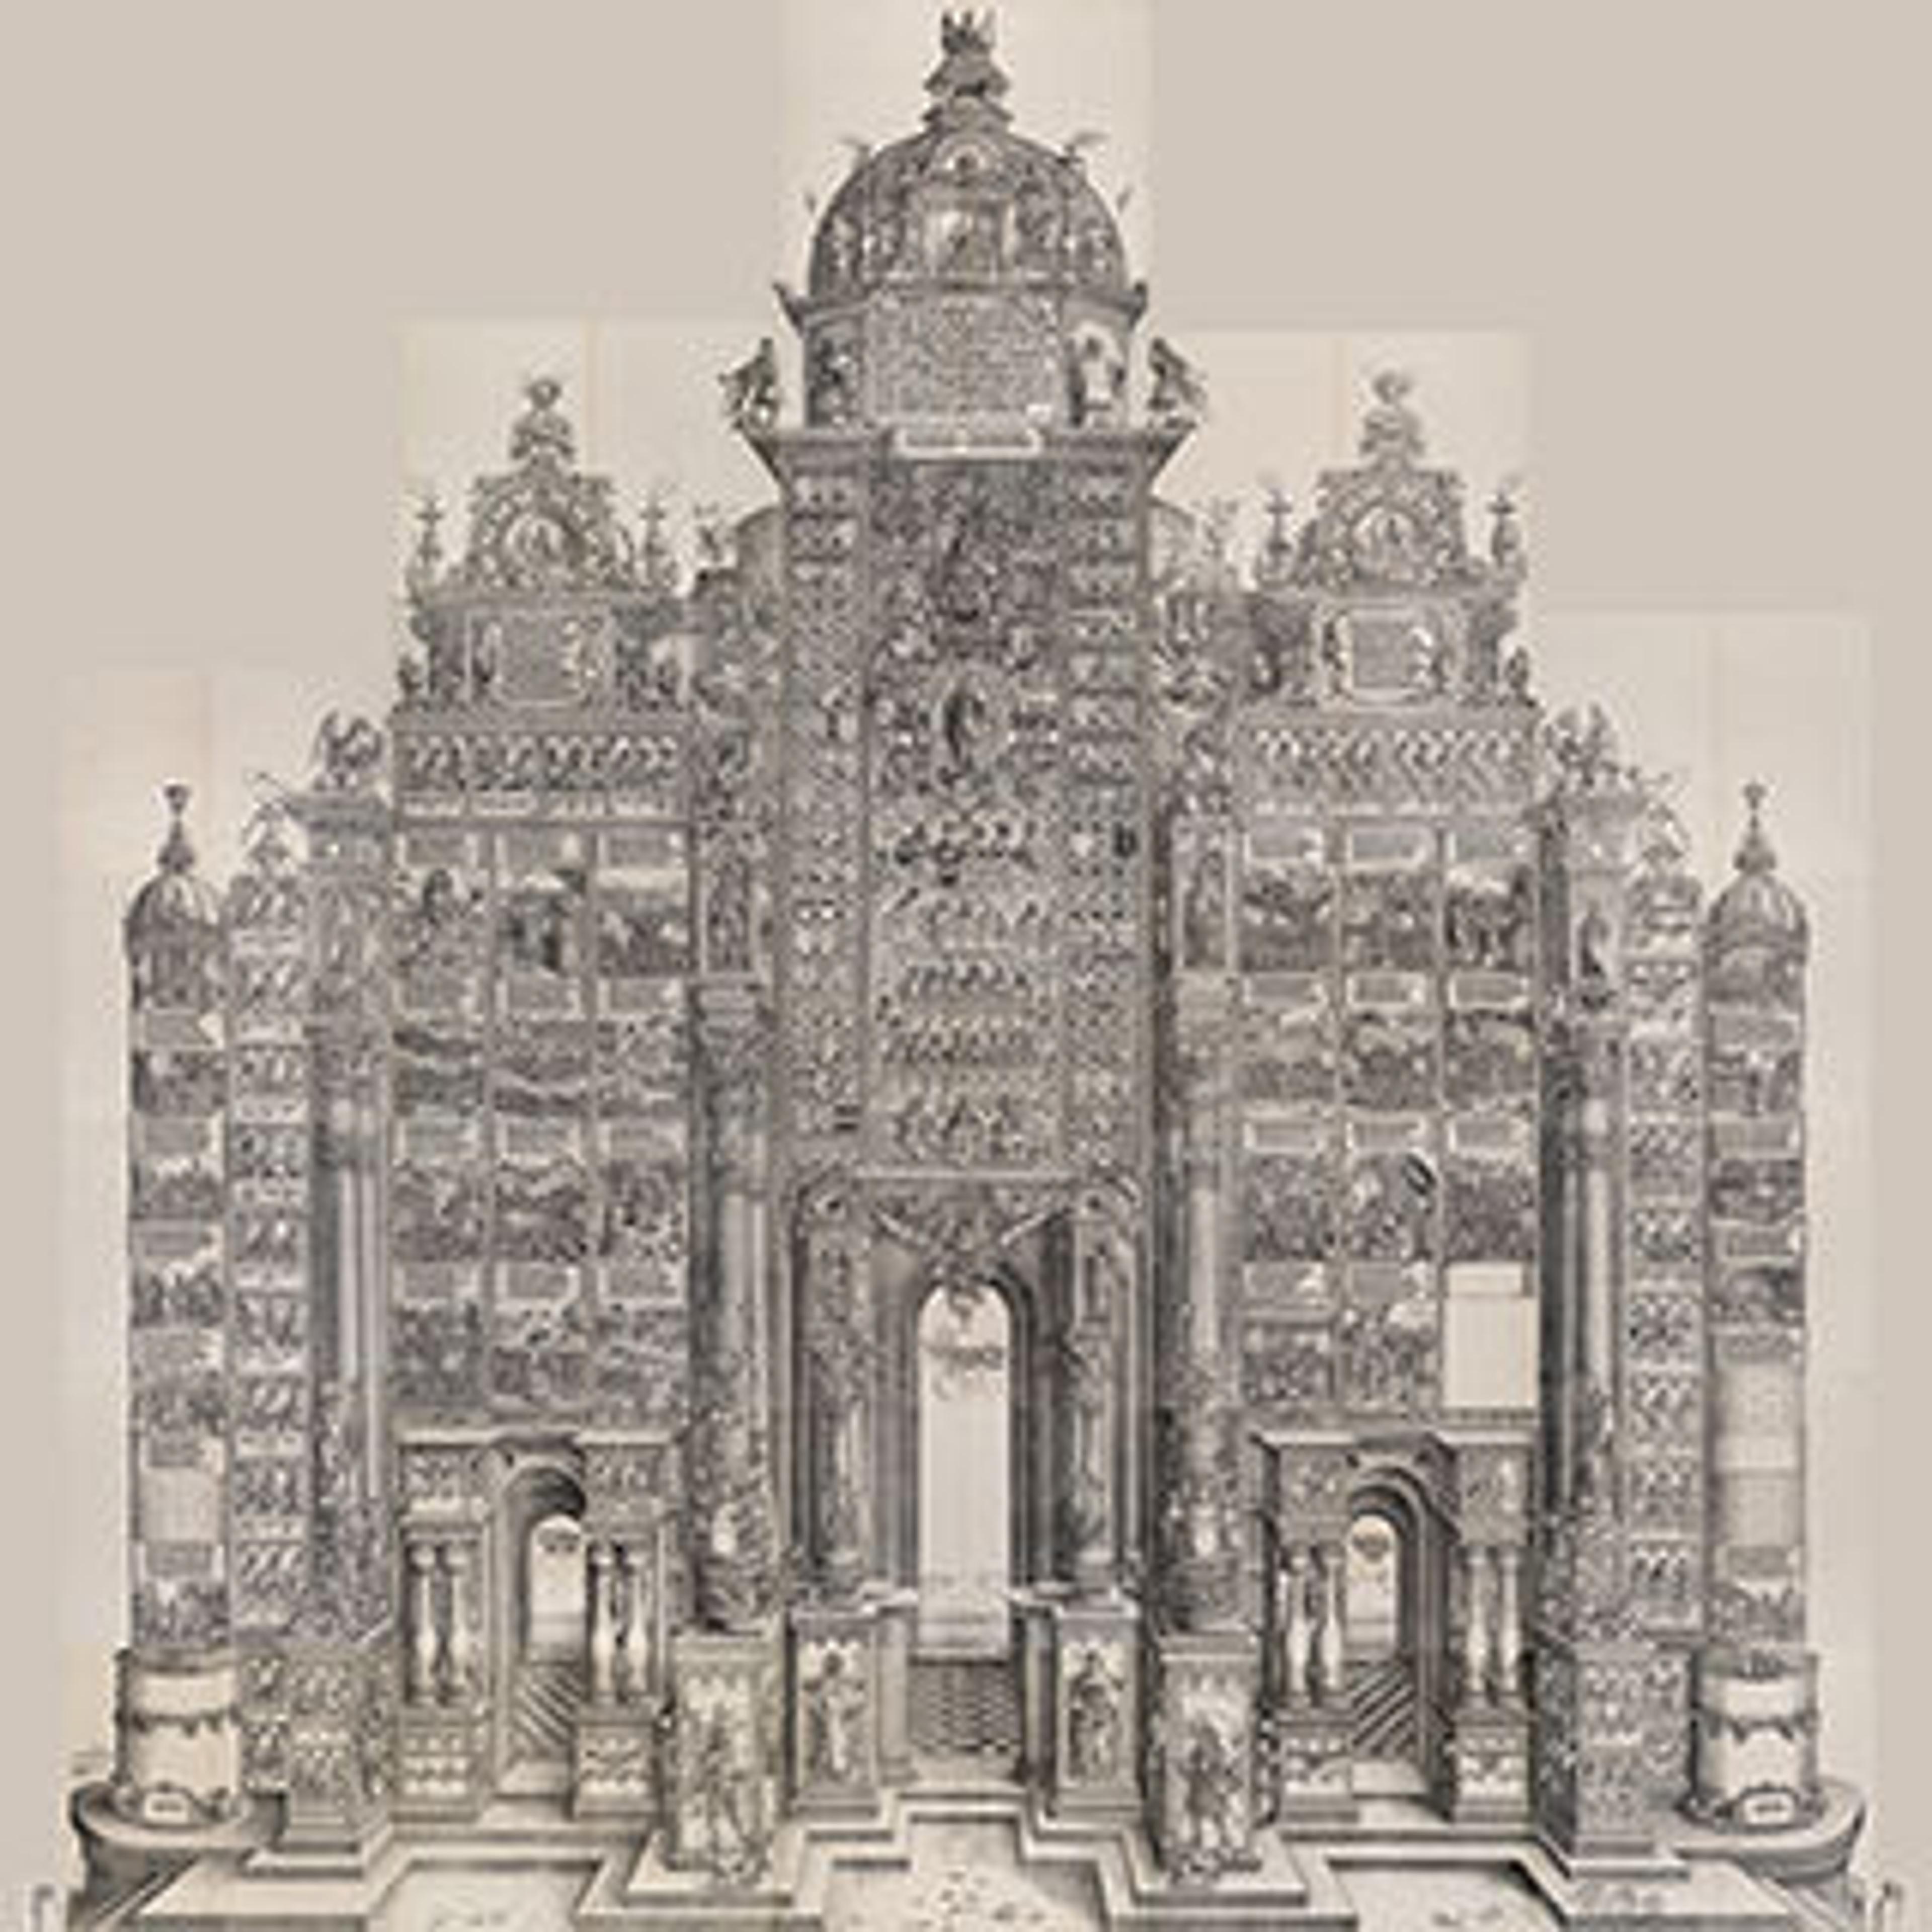 Thumbnail image of the Arch of Honor